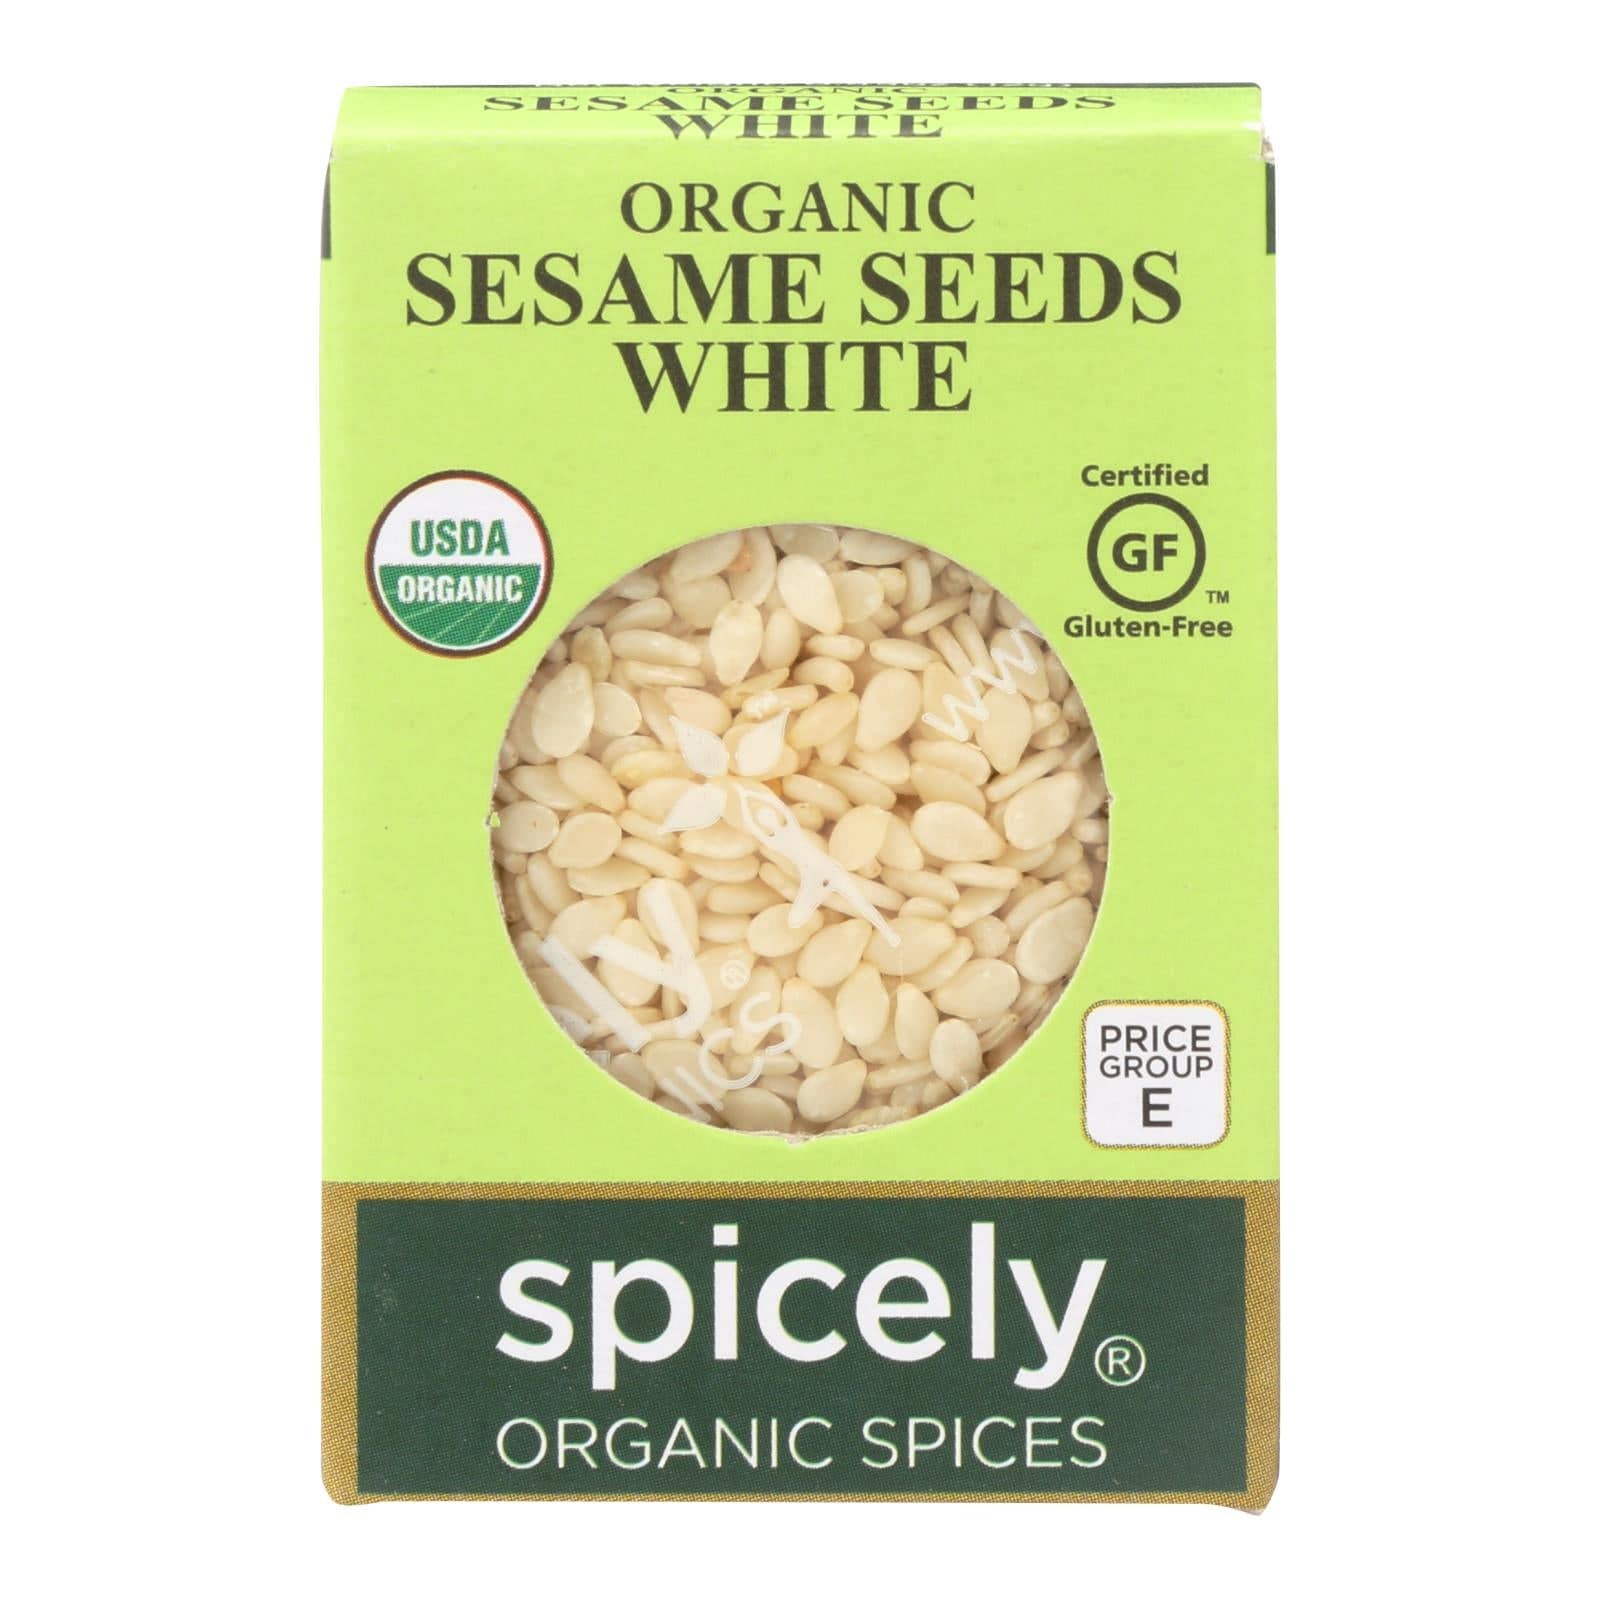 Buy Spicely Organics - Organic Sesame Seed - White - Case Of 6 - 0.45 Oz.  at OnlyNaturals.us